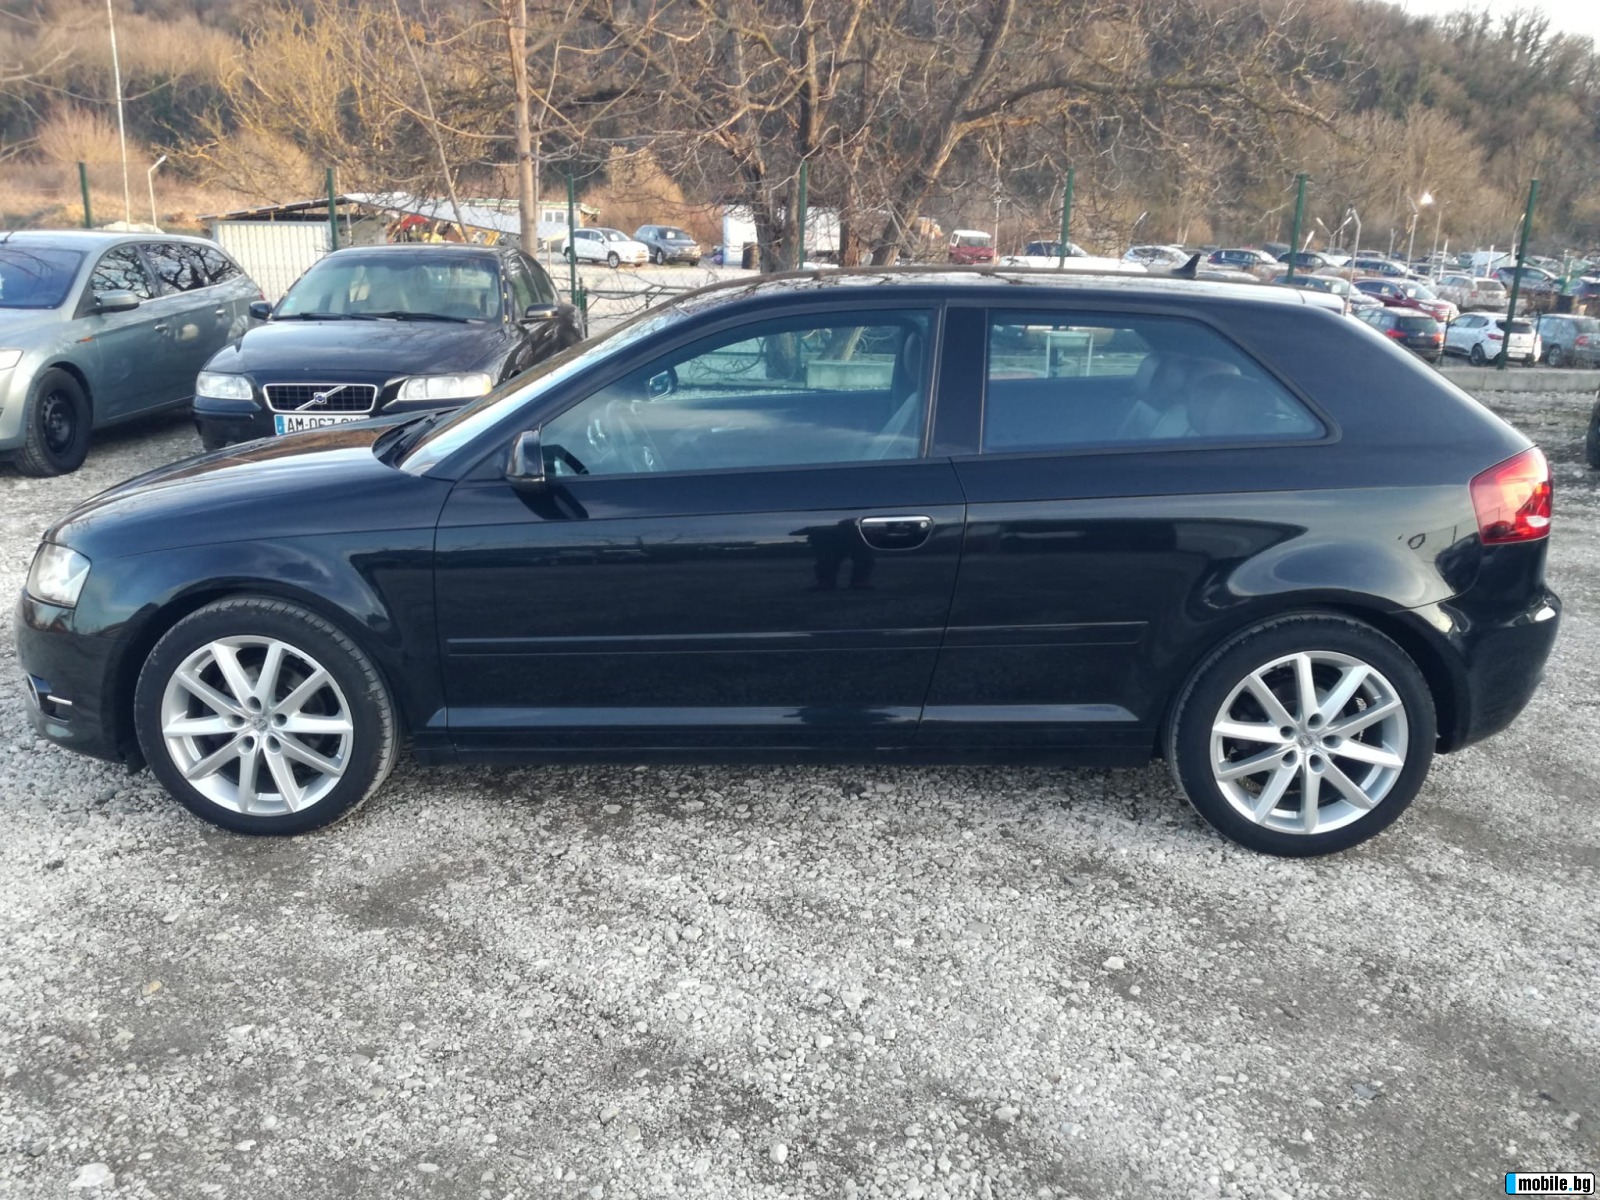 Audi A3 1.6TDI AMBITION LUXE | Mobile.bg   4